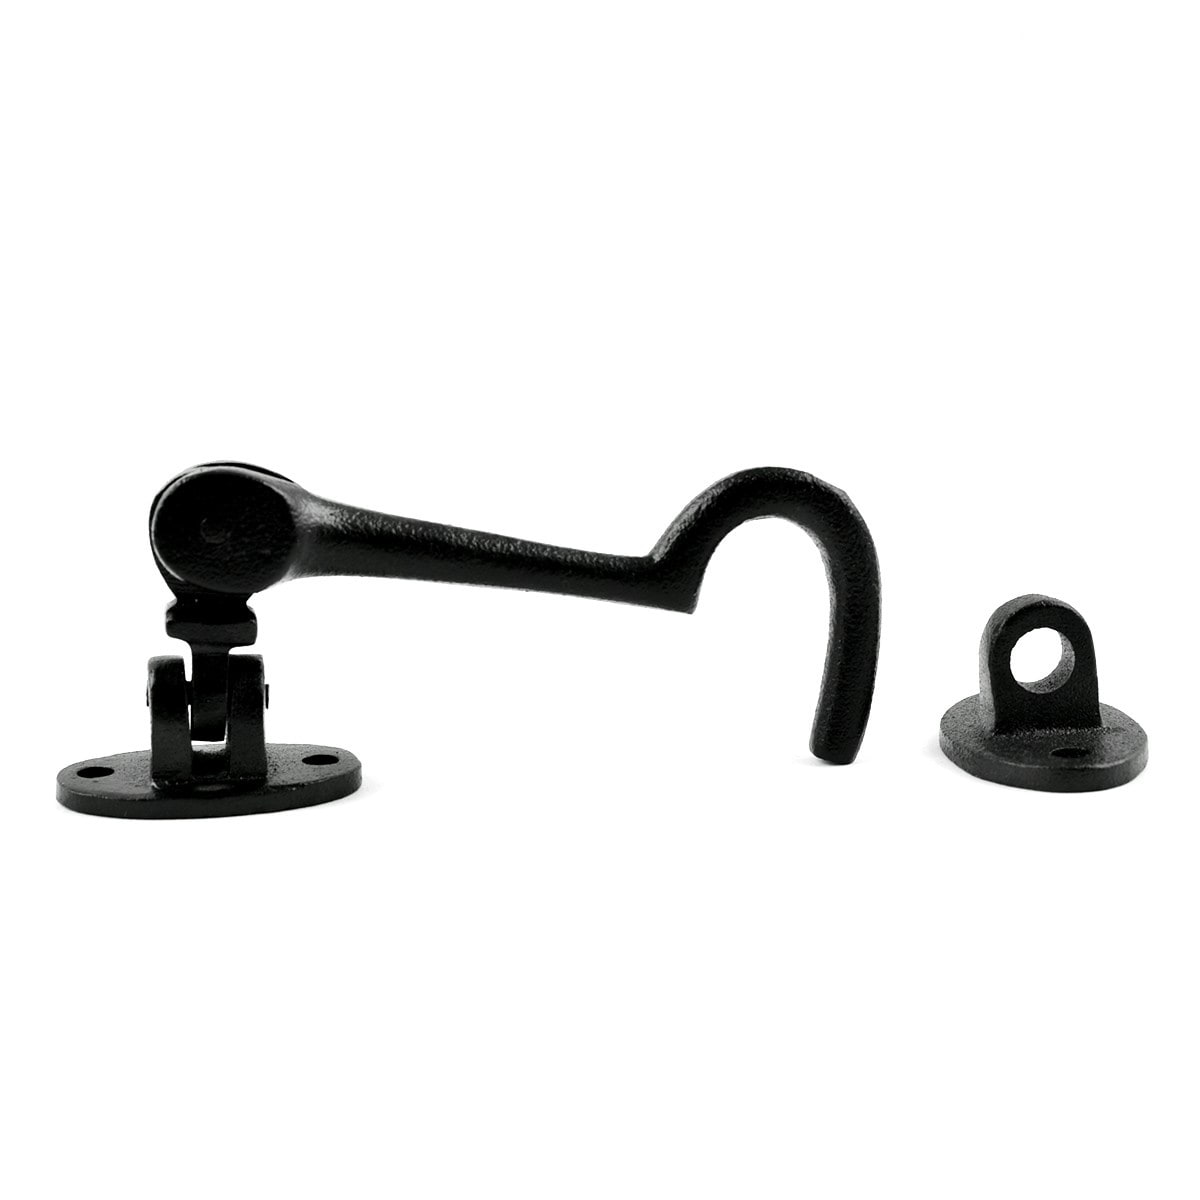 Renovators Supply Double Wall Hook Black Wrought Iron Hat and Coat